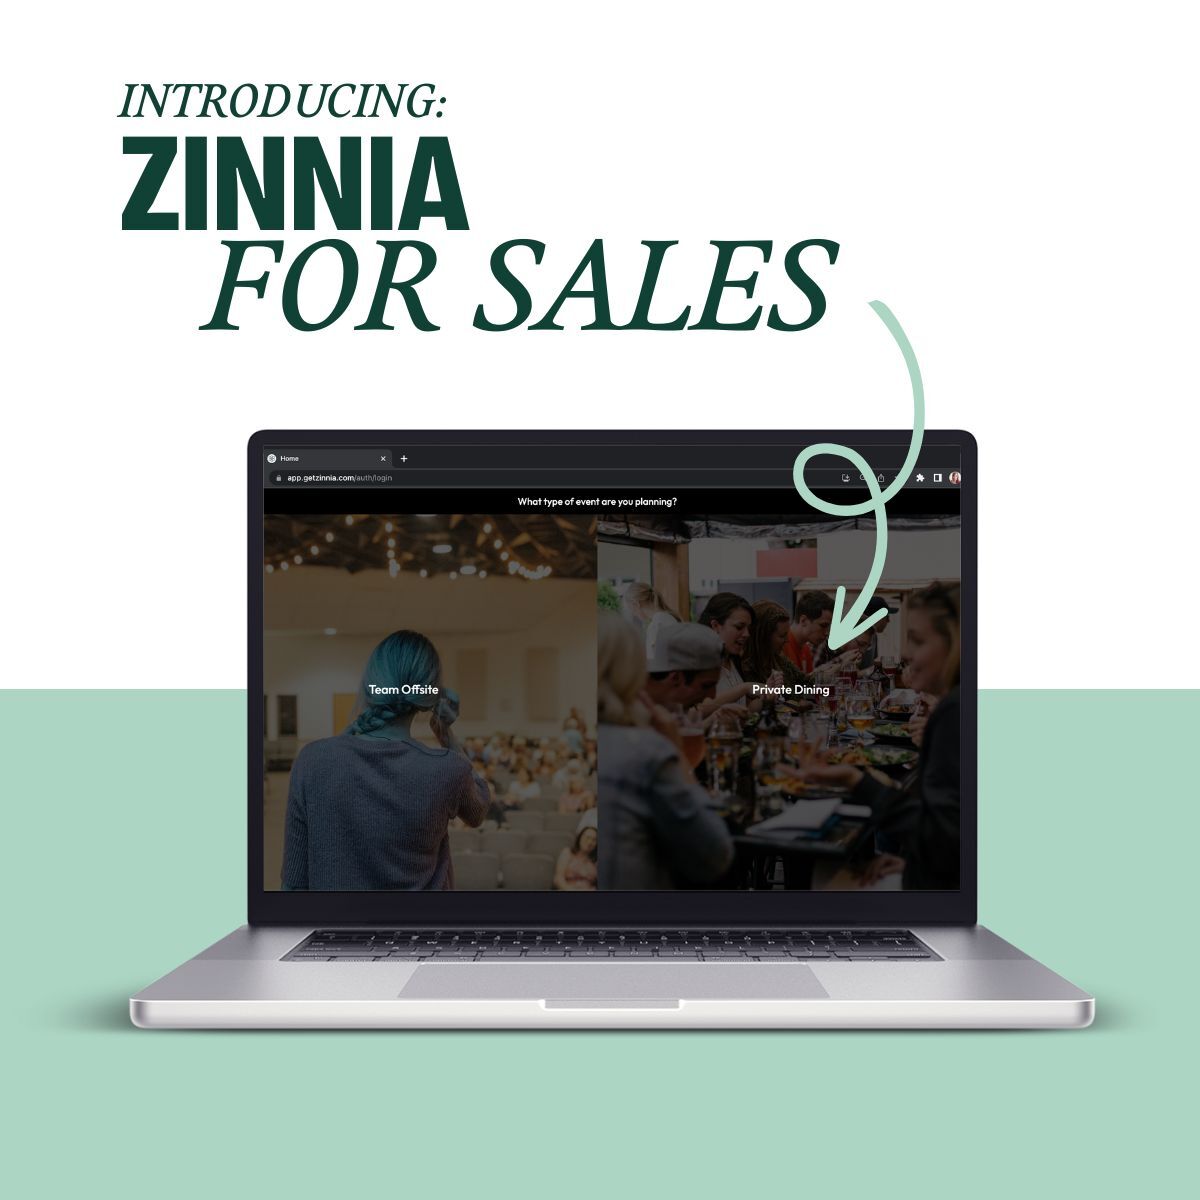 Elevate your dining experience with Zinnia for Sales! Discover the perfect private dining solutions. First 100 Zinnia Pro subscribers get a massage on us! 💆‍♀️💆‍♂️🍽️ #ZinniaForSales #PrivateDining #LimitedOffer